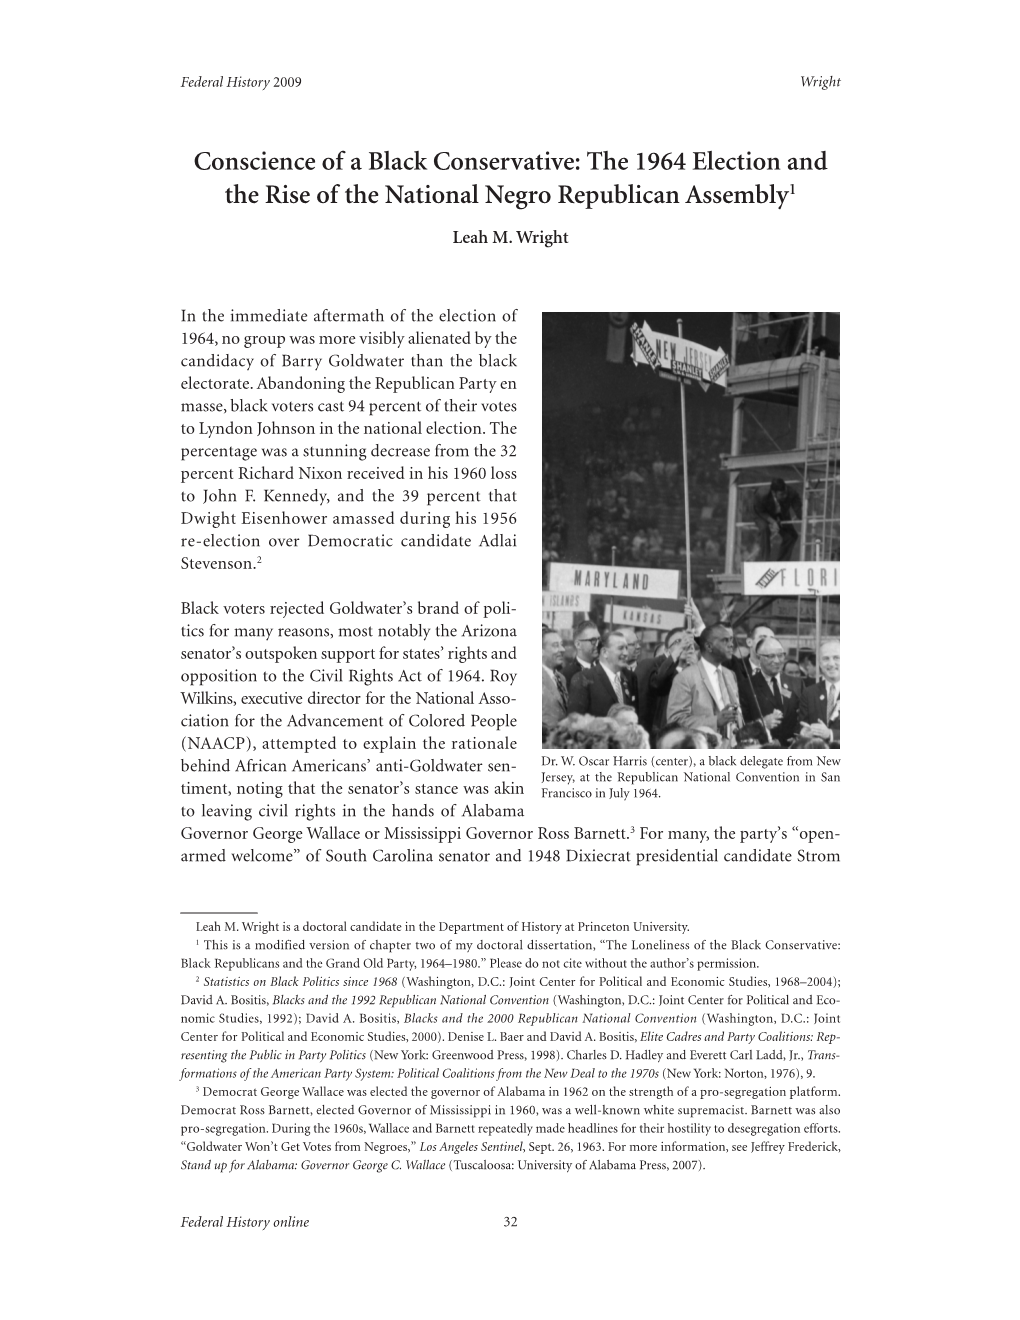 The 1964 Election and the Rise of the National Negro Republican Assembly 1